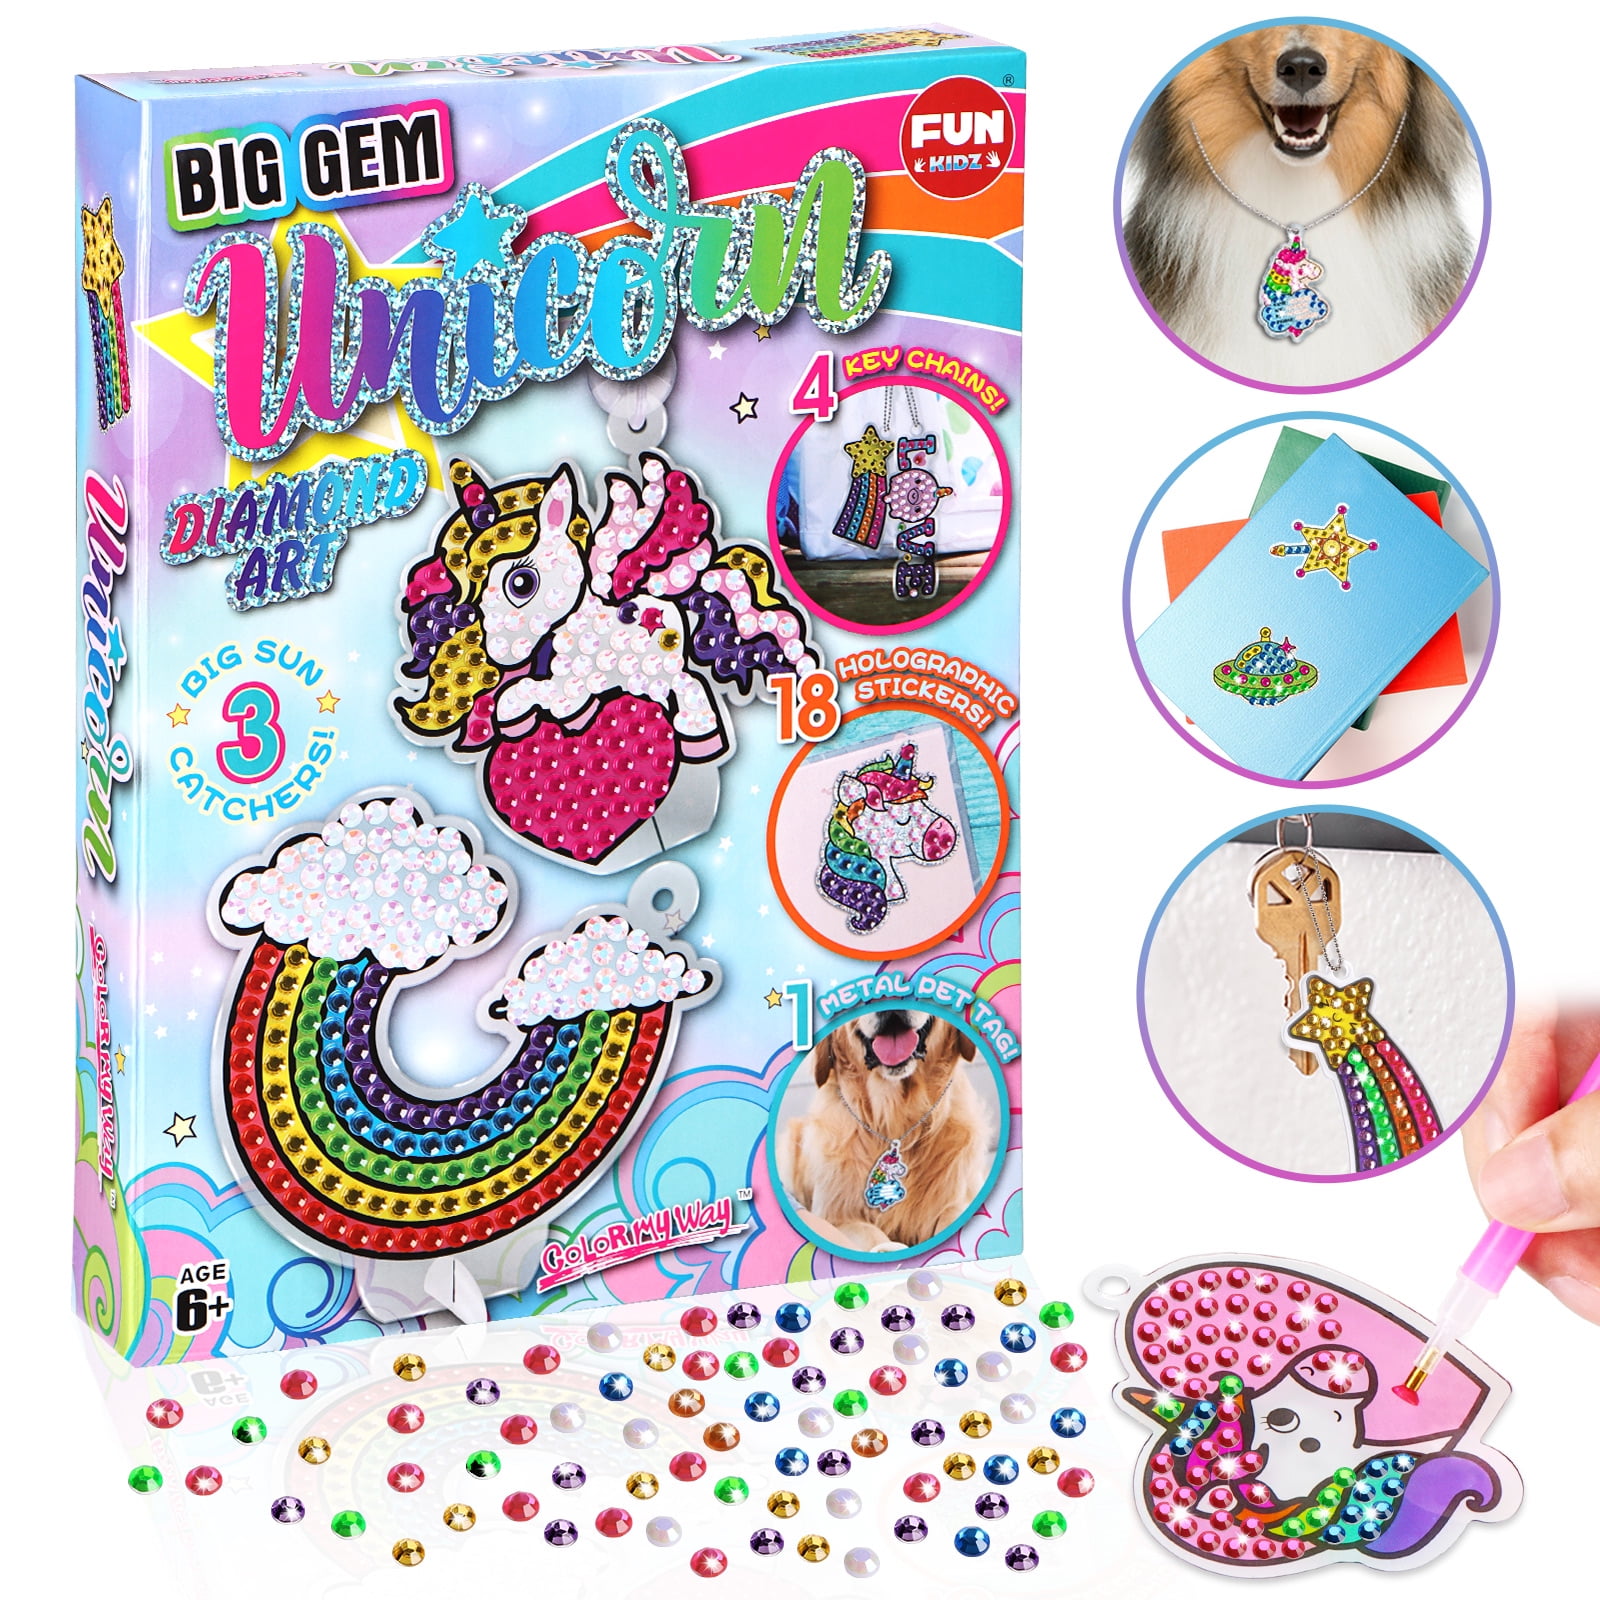 MAILUREN Diamond Painting Kits for Kids with Double Side Keychains and  Stickers, Big Gem Art Kits for Kids, Crafts for Girls Ages 6-12, Unicorn  Painting Kit( Included Gift Box and Gift Bag) 